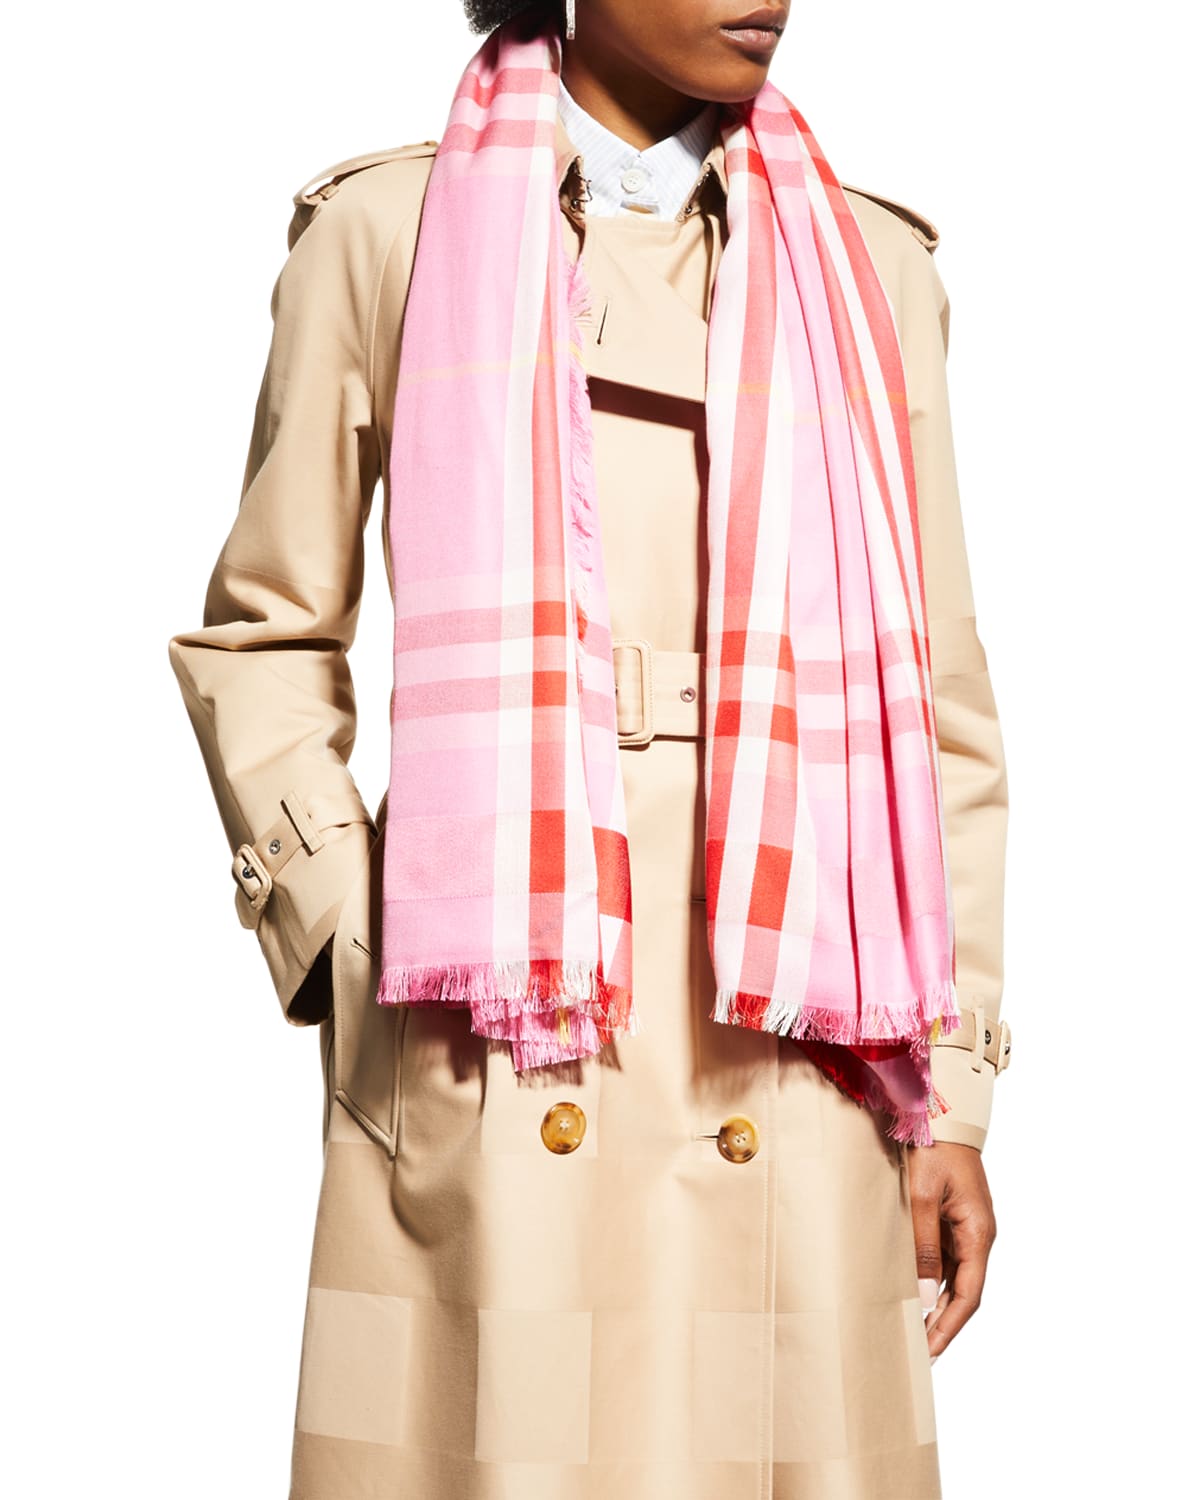 Burberry Lightweight Check Wool Silk Scarf in Pink